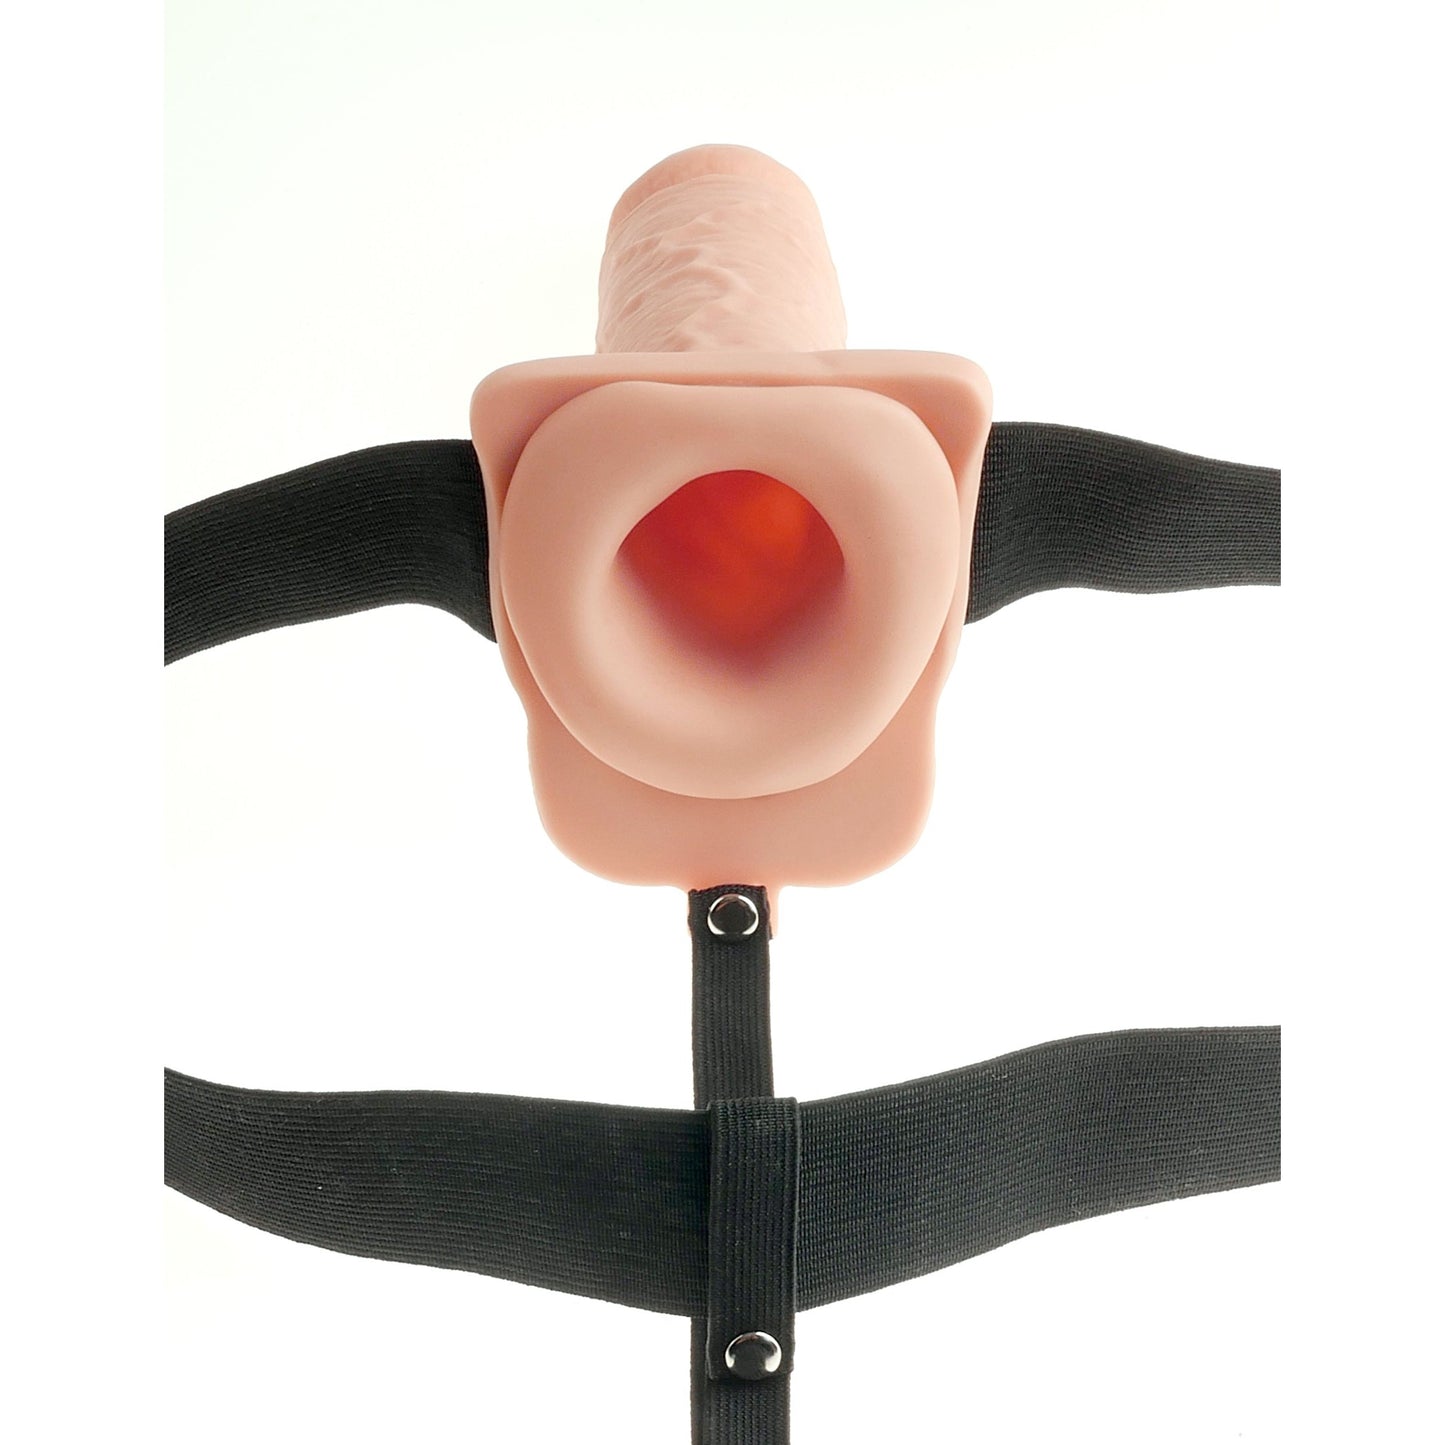  7" Hollow Rechargeable Strap-On with Balls